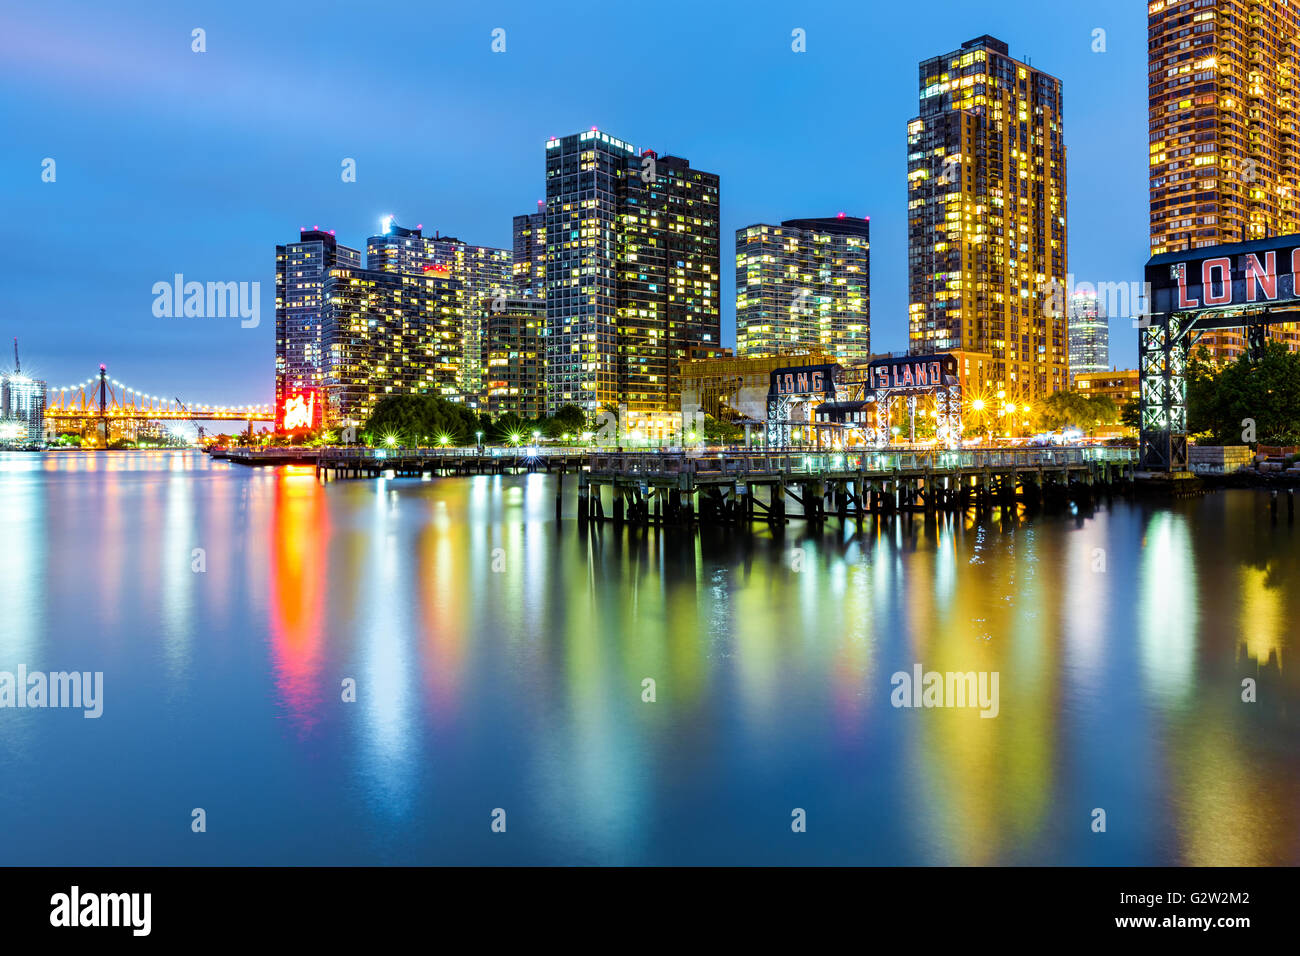 Long Island City skyline at dusk. LIC is the westernmost residential and commercial neighborhood of the NYC borough of Queens Stock Photo